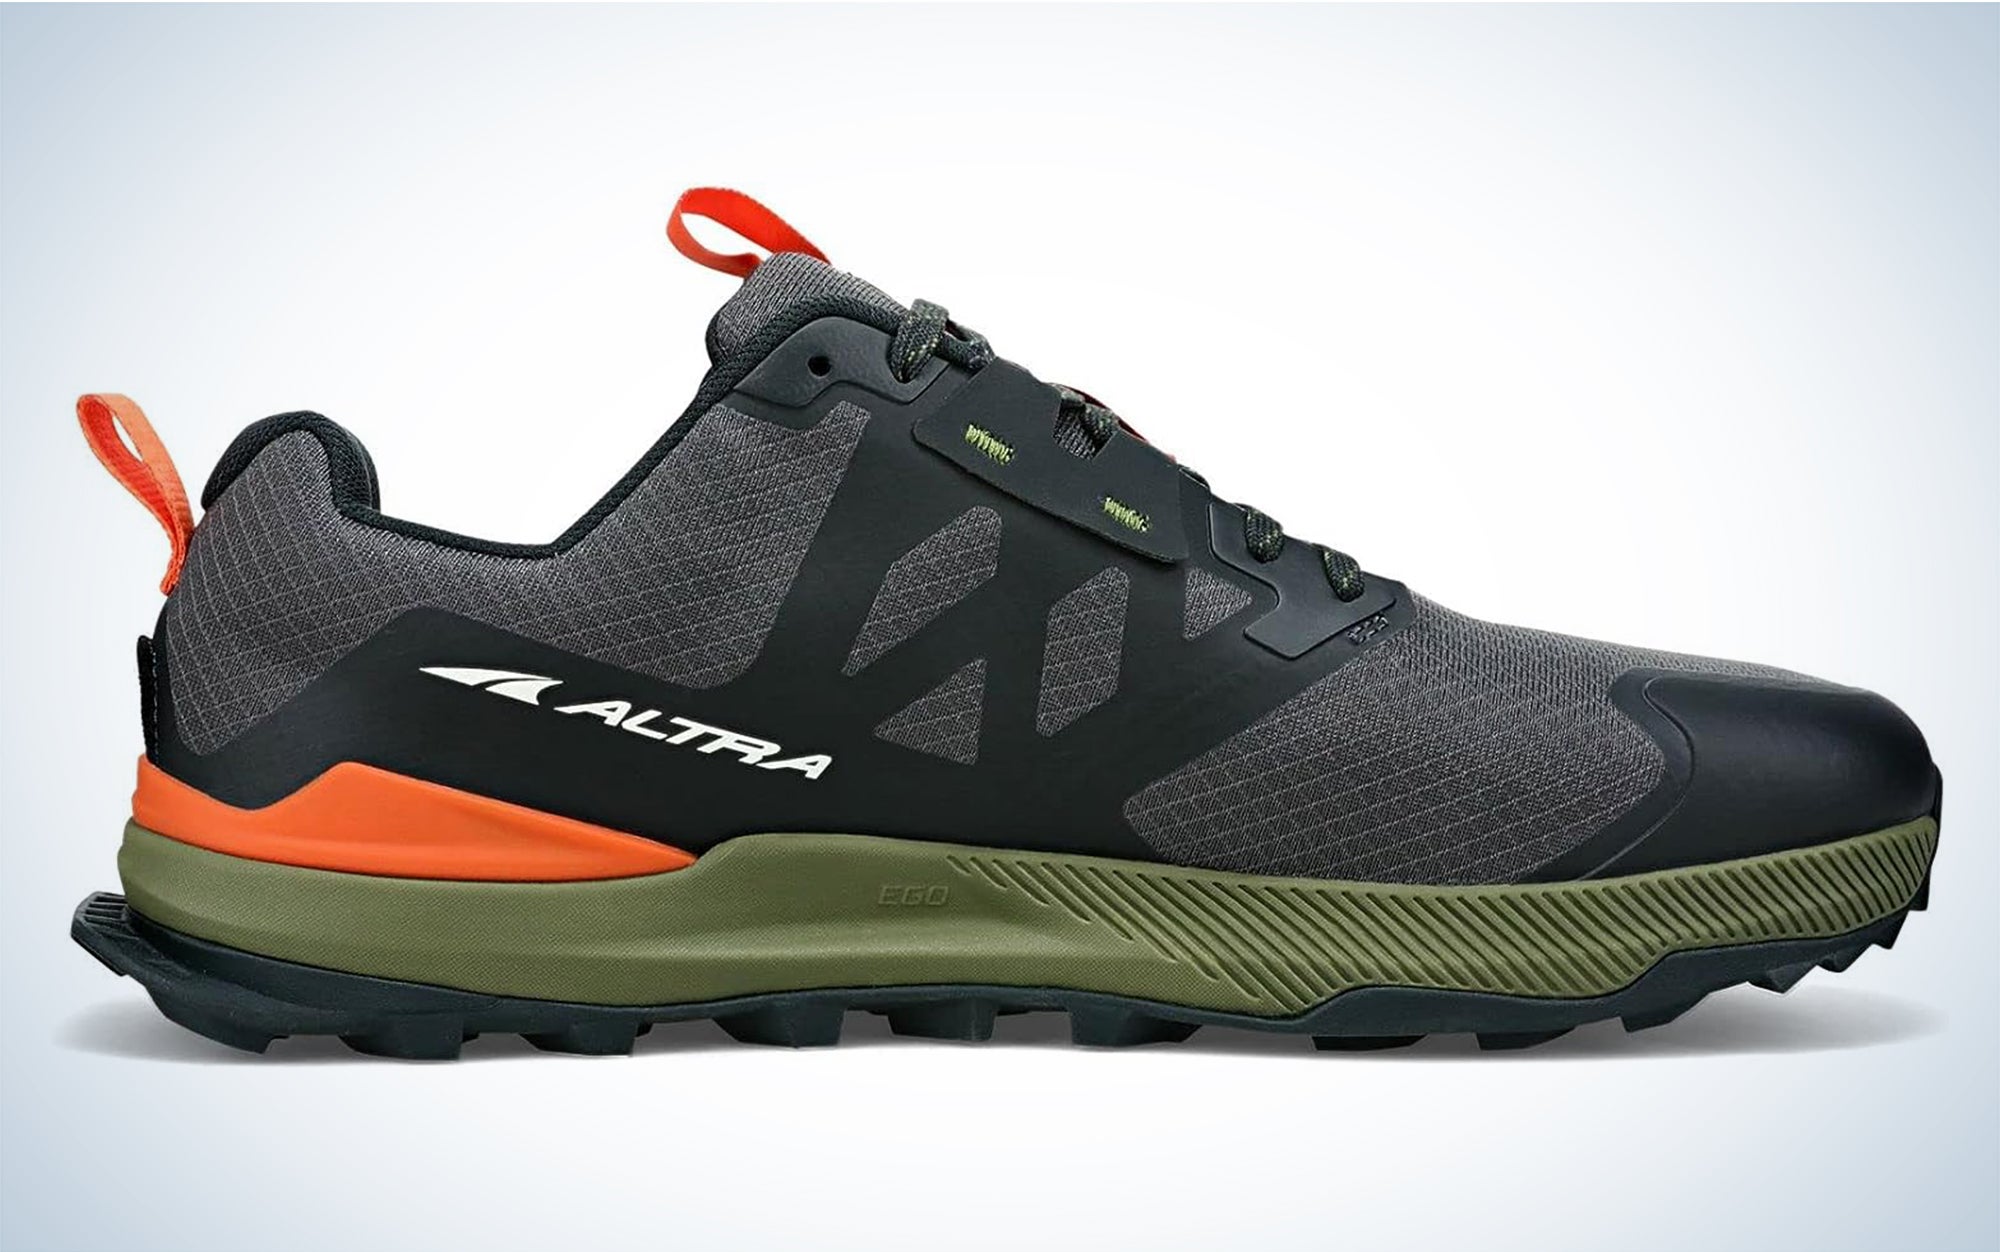 We tested the Altra Lone Peak 7.